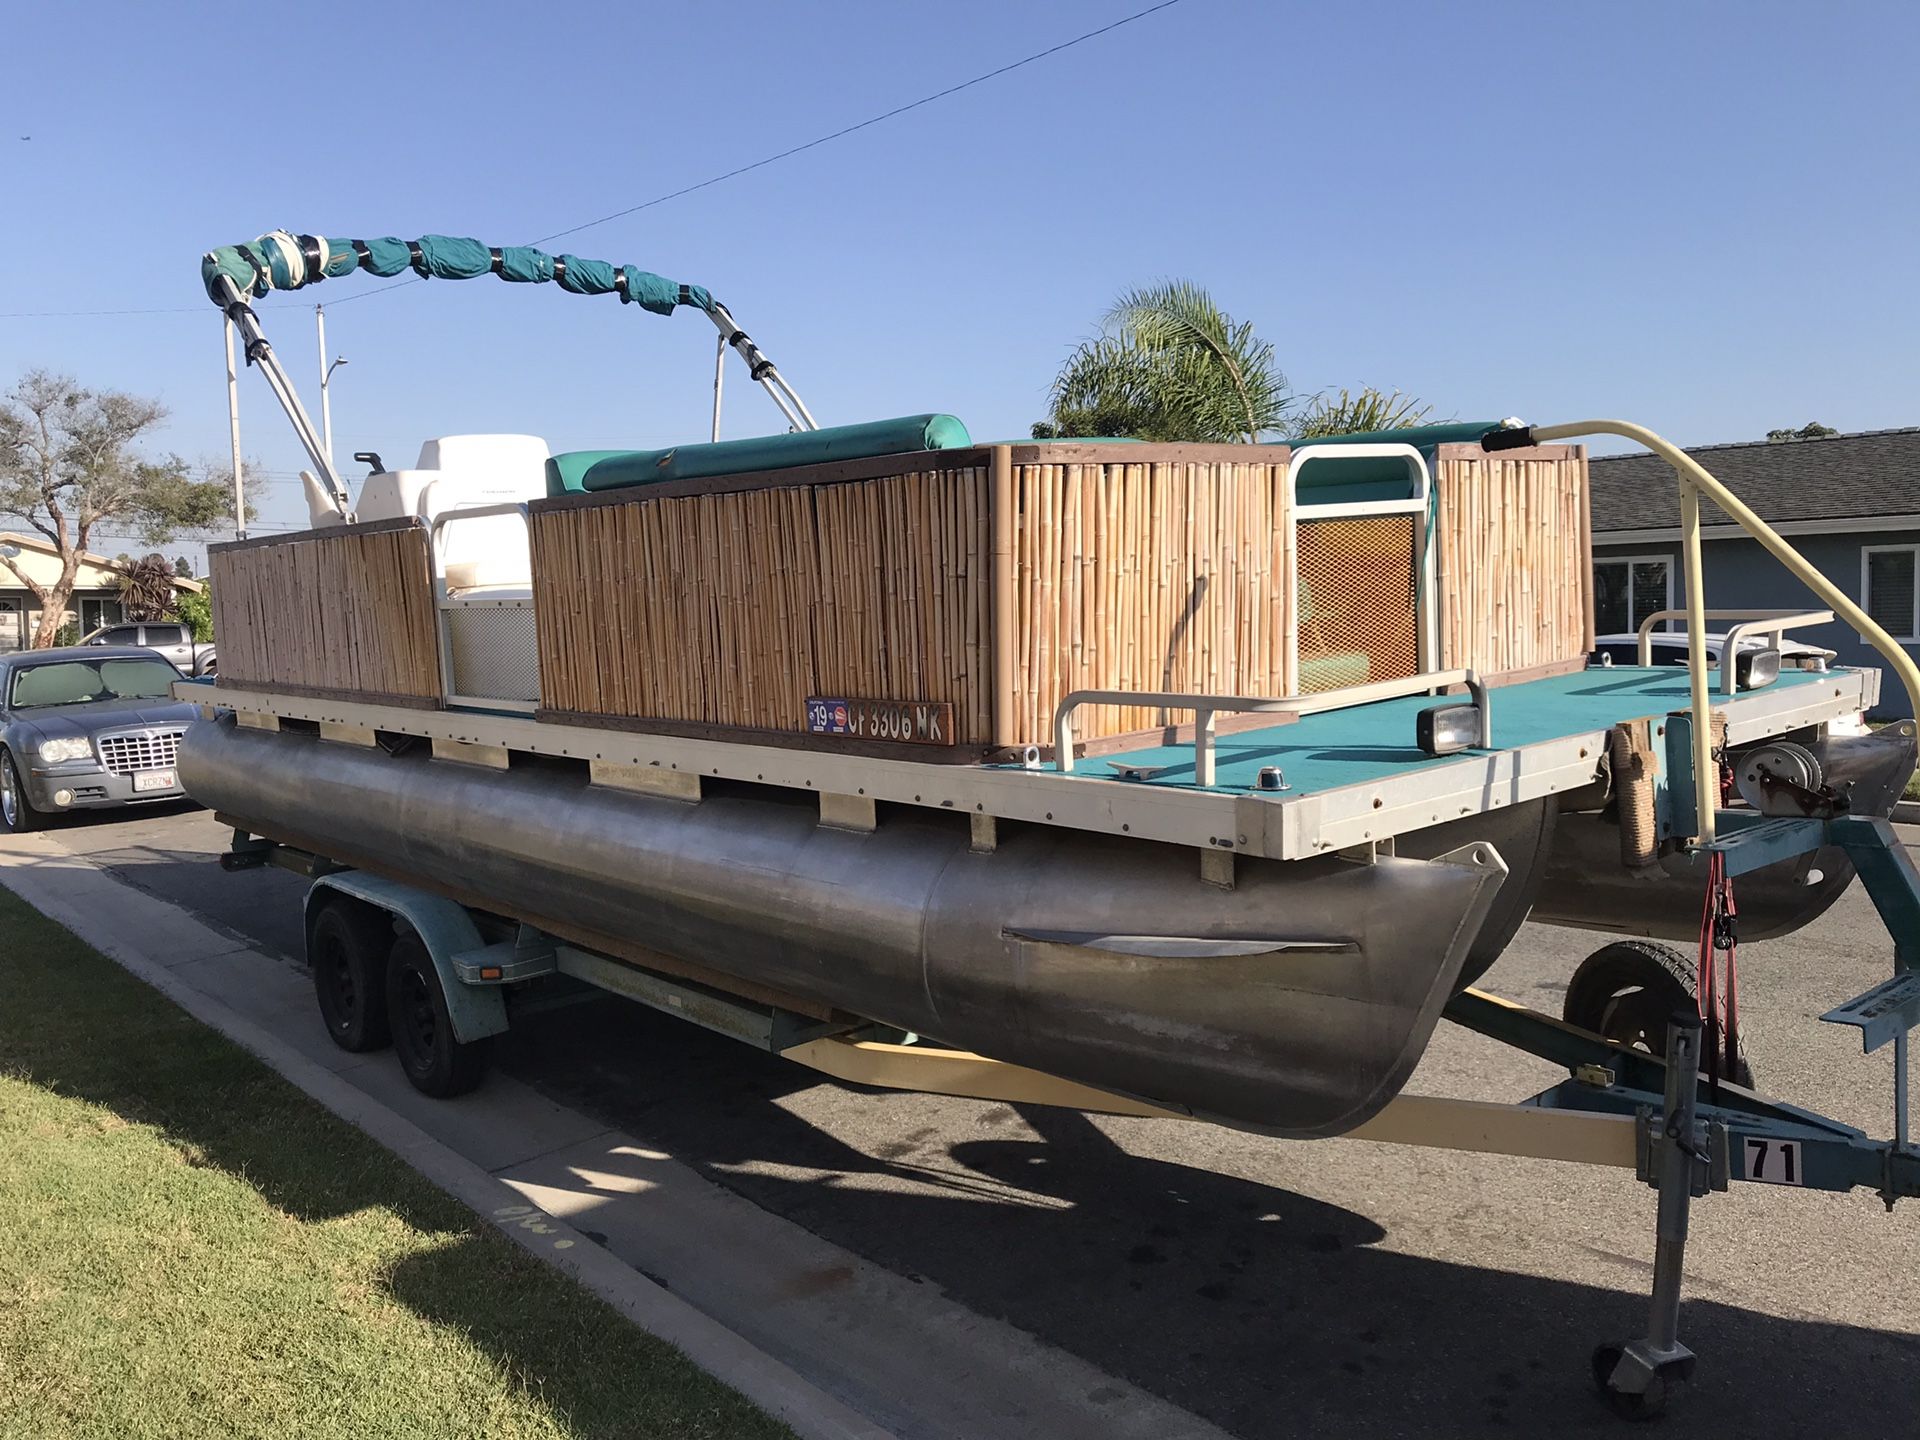 1993 Godfrey Tritoon pontoon boat with outboard